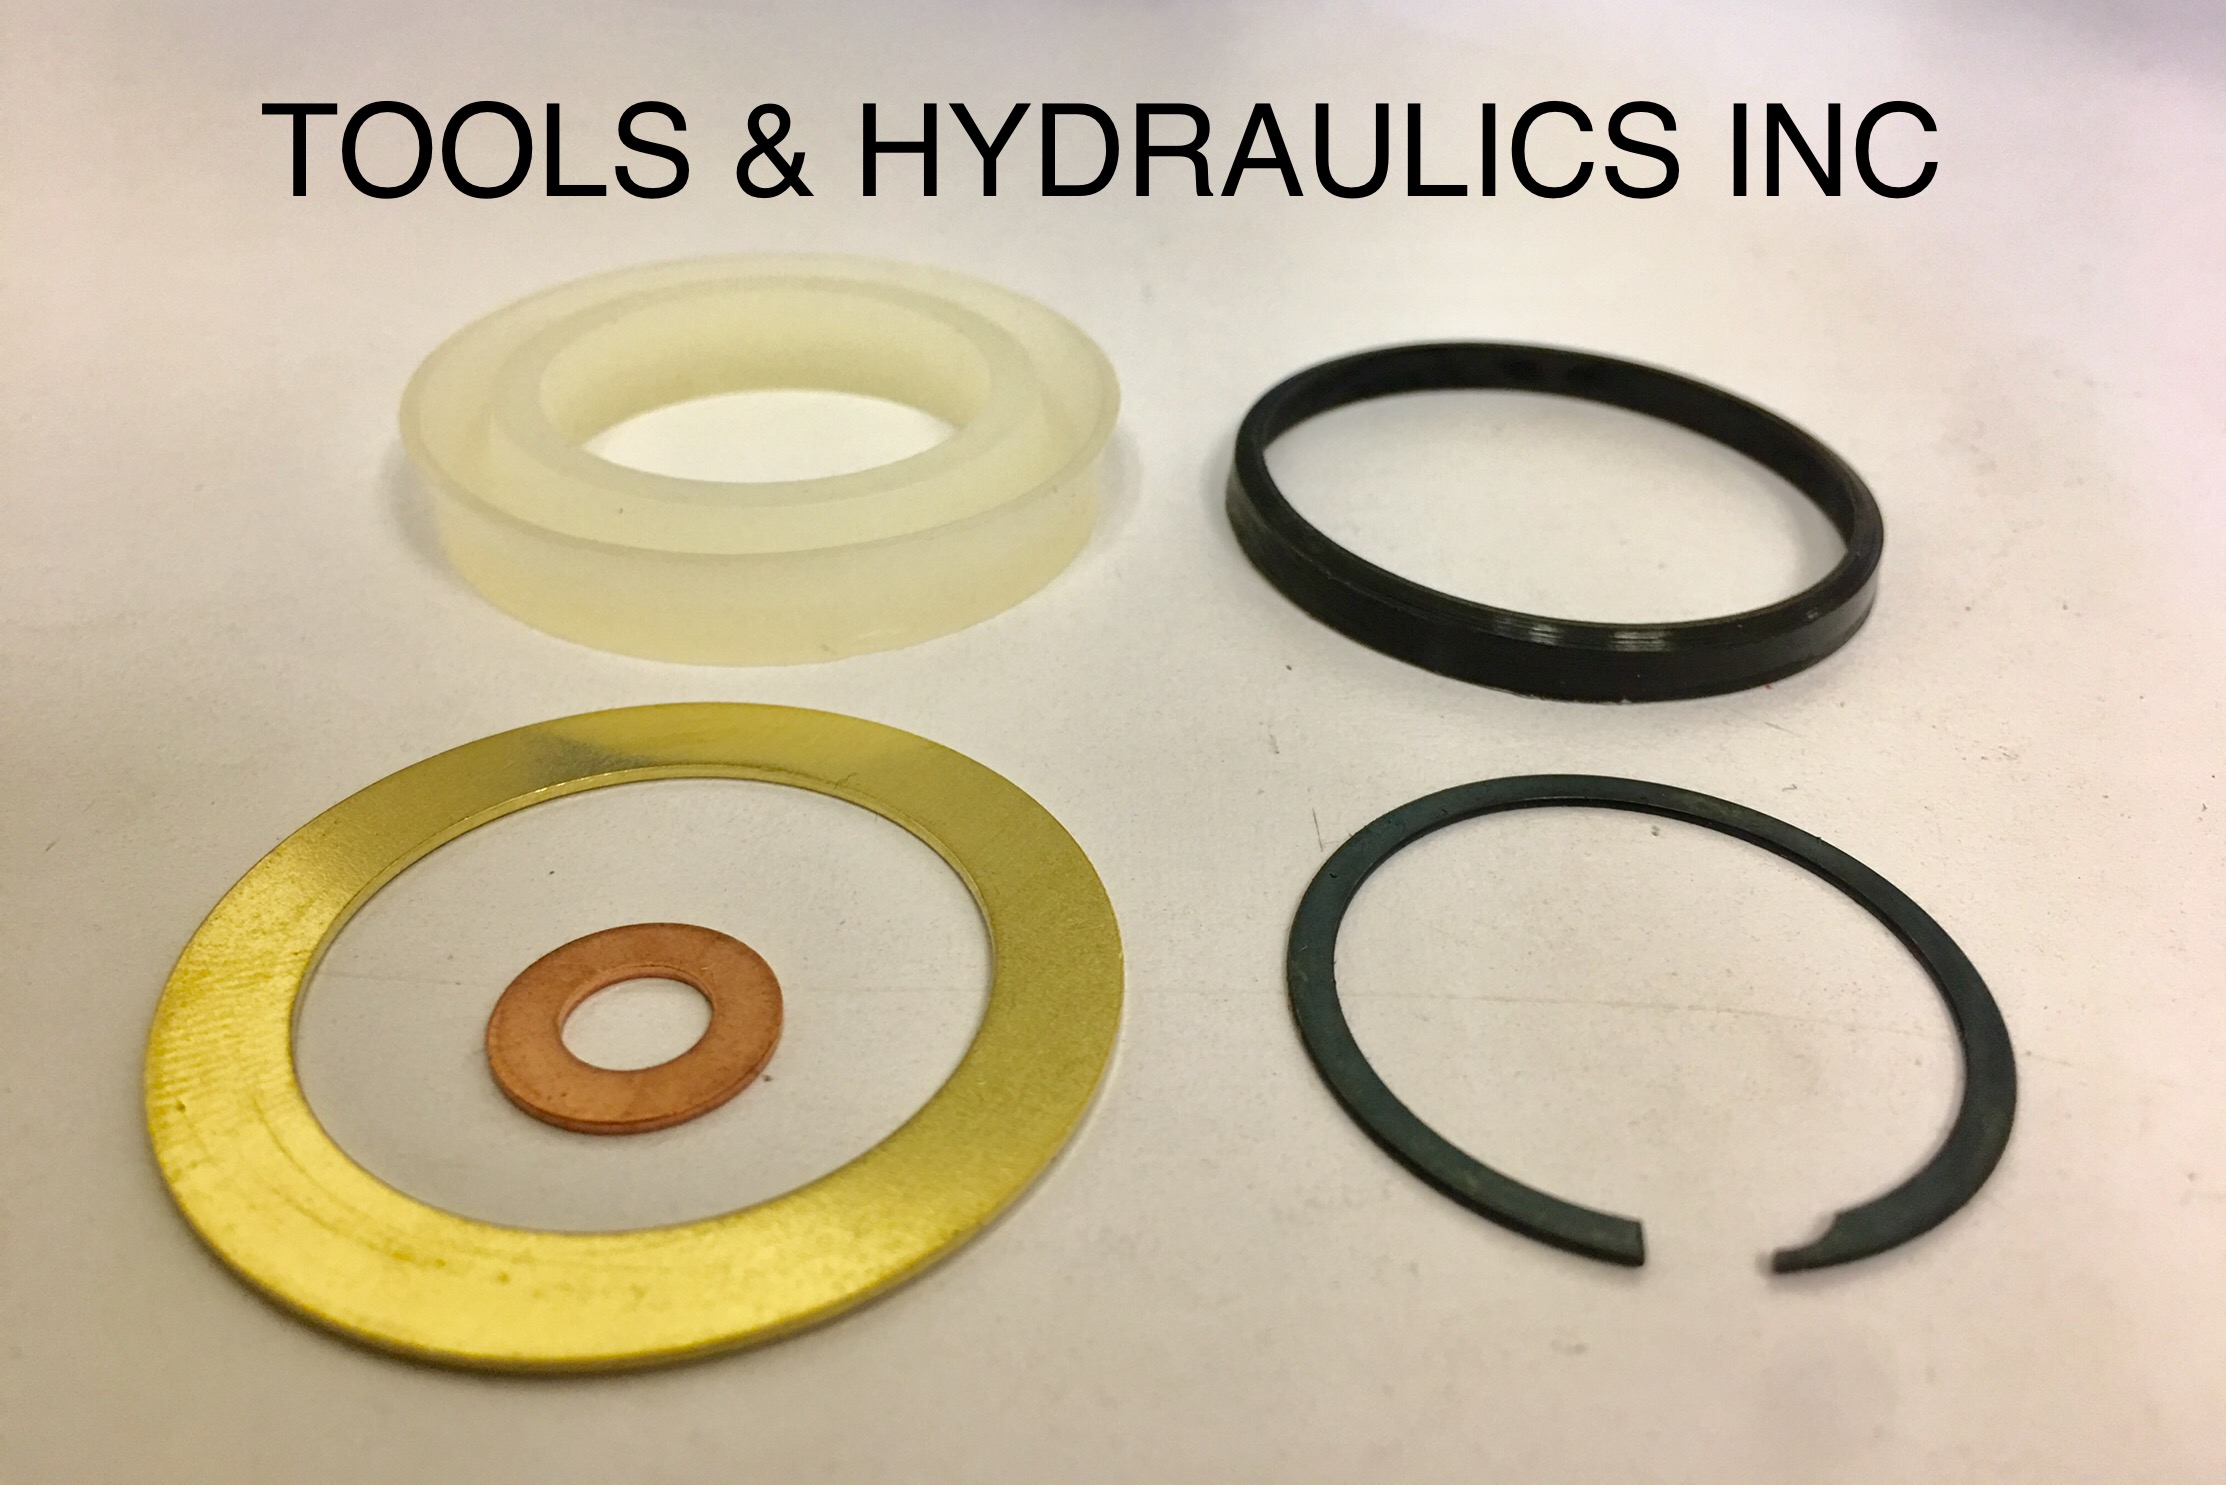 Kit # RC308K Details about   Hydraulic Seal kit Replacment For Enerpac Ram RC-308 